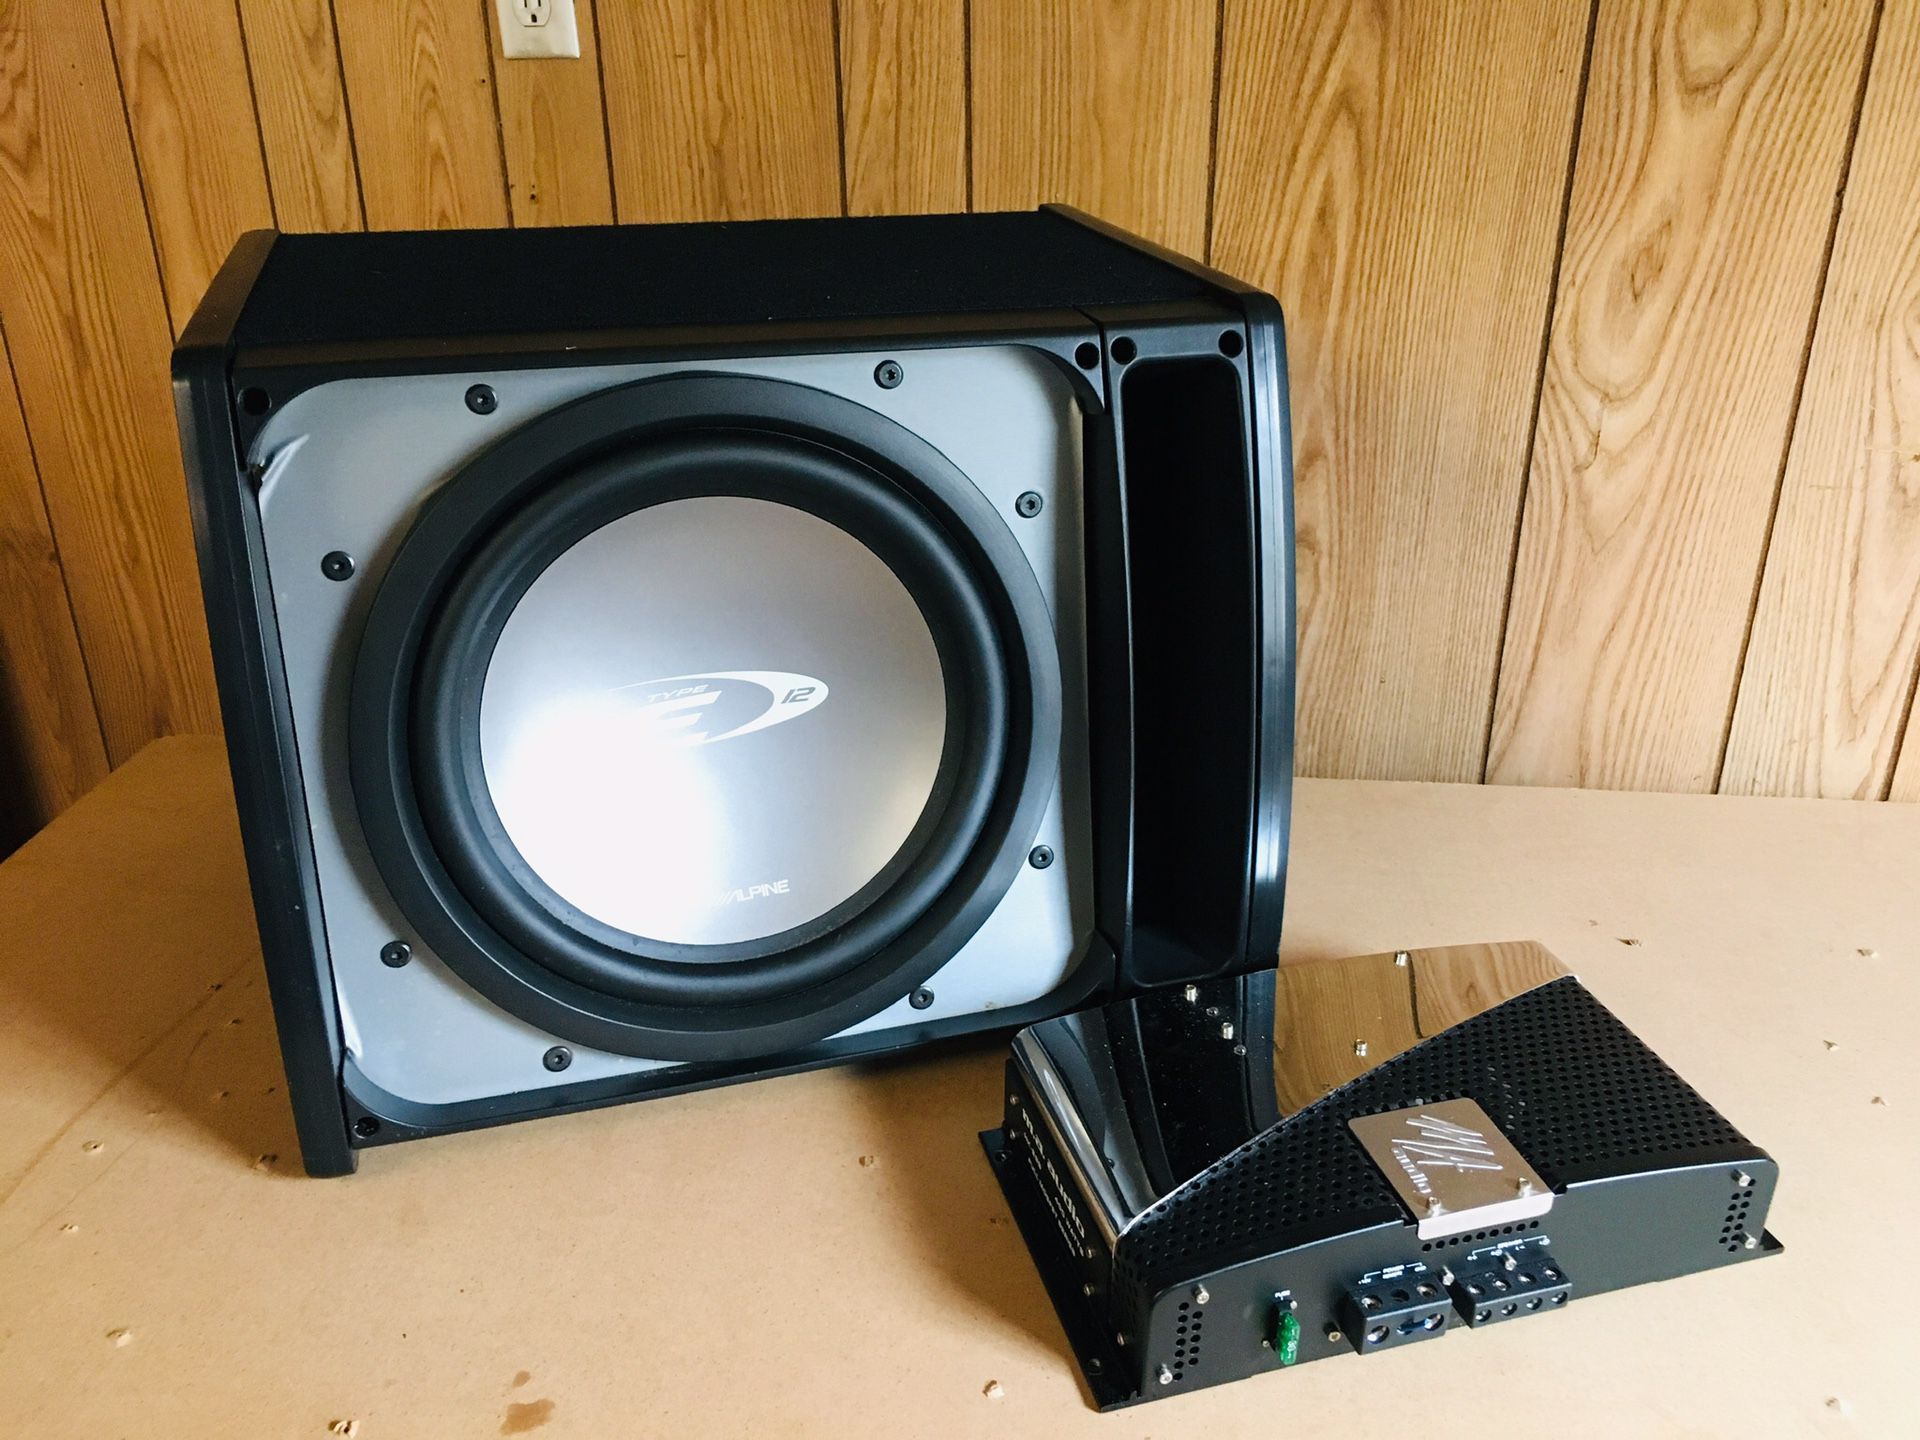 Subwoofer 12” speaker with M. A. Audio Amplifier by Alpine.